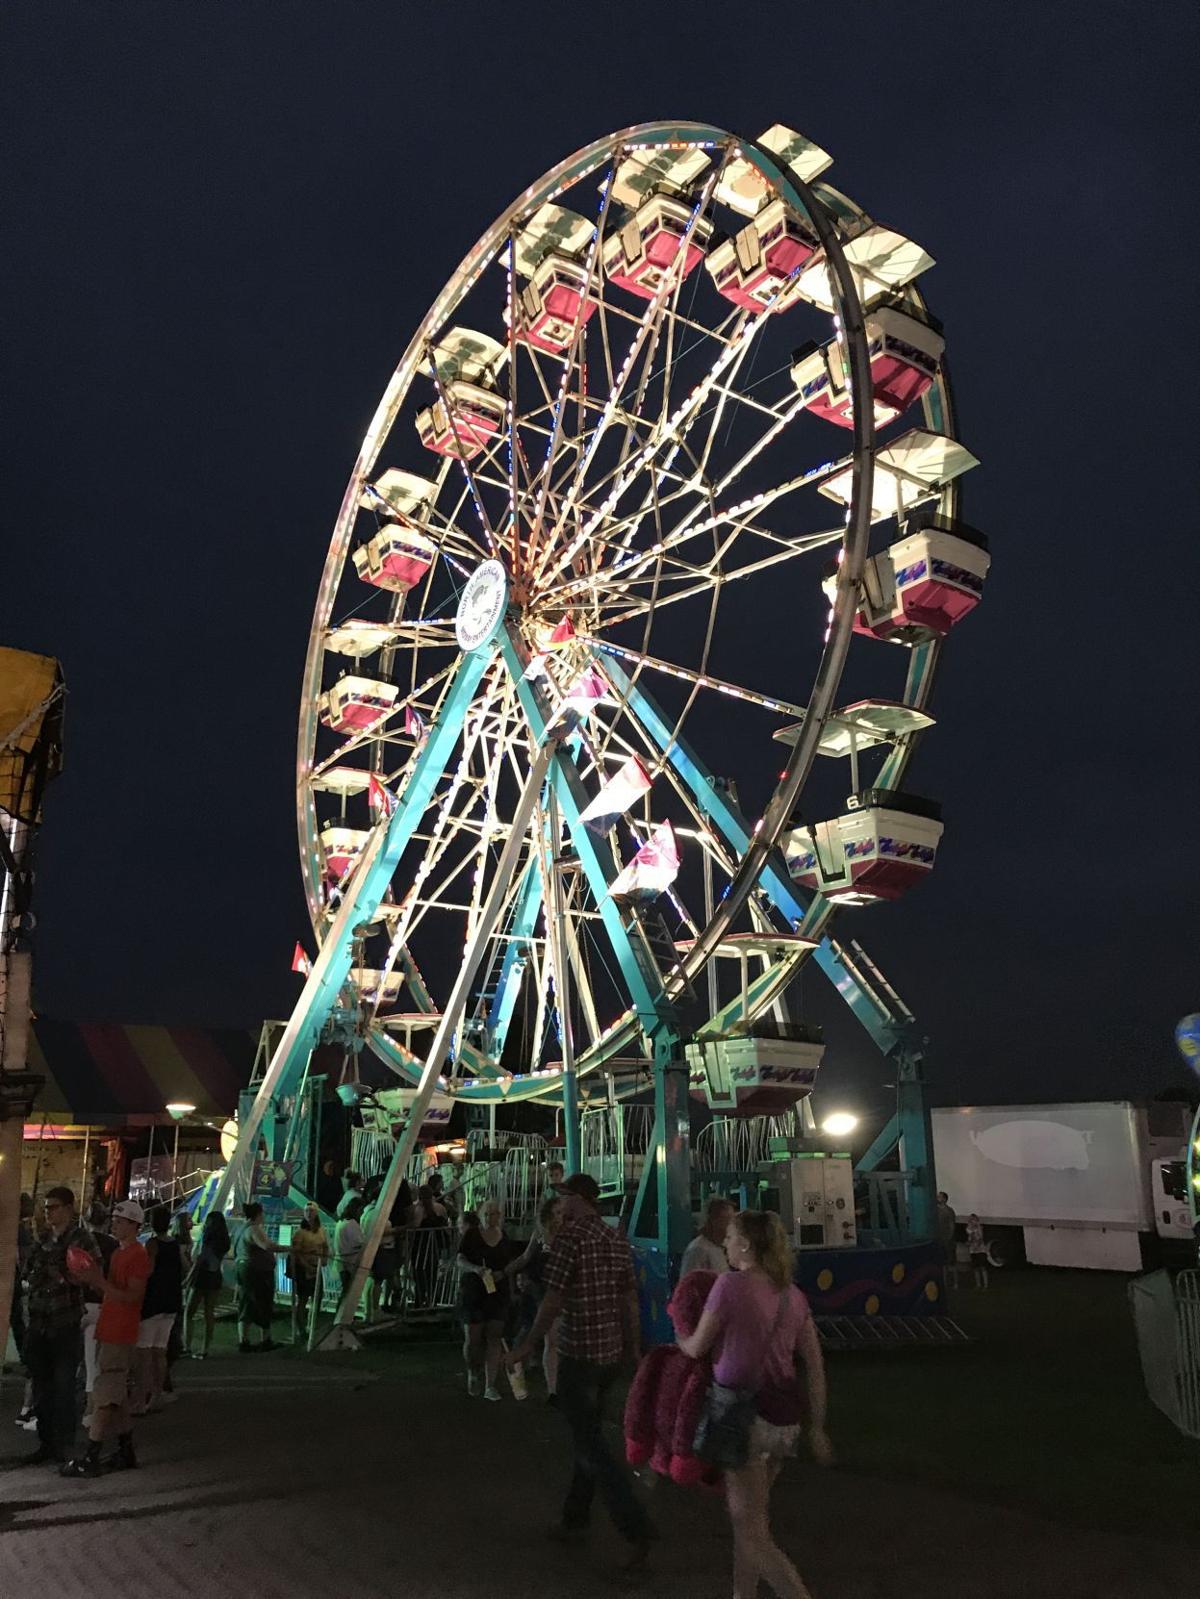 Gallery Porter County Fair at night Local Photo Galleries